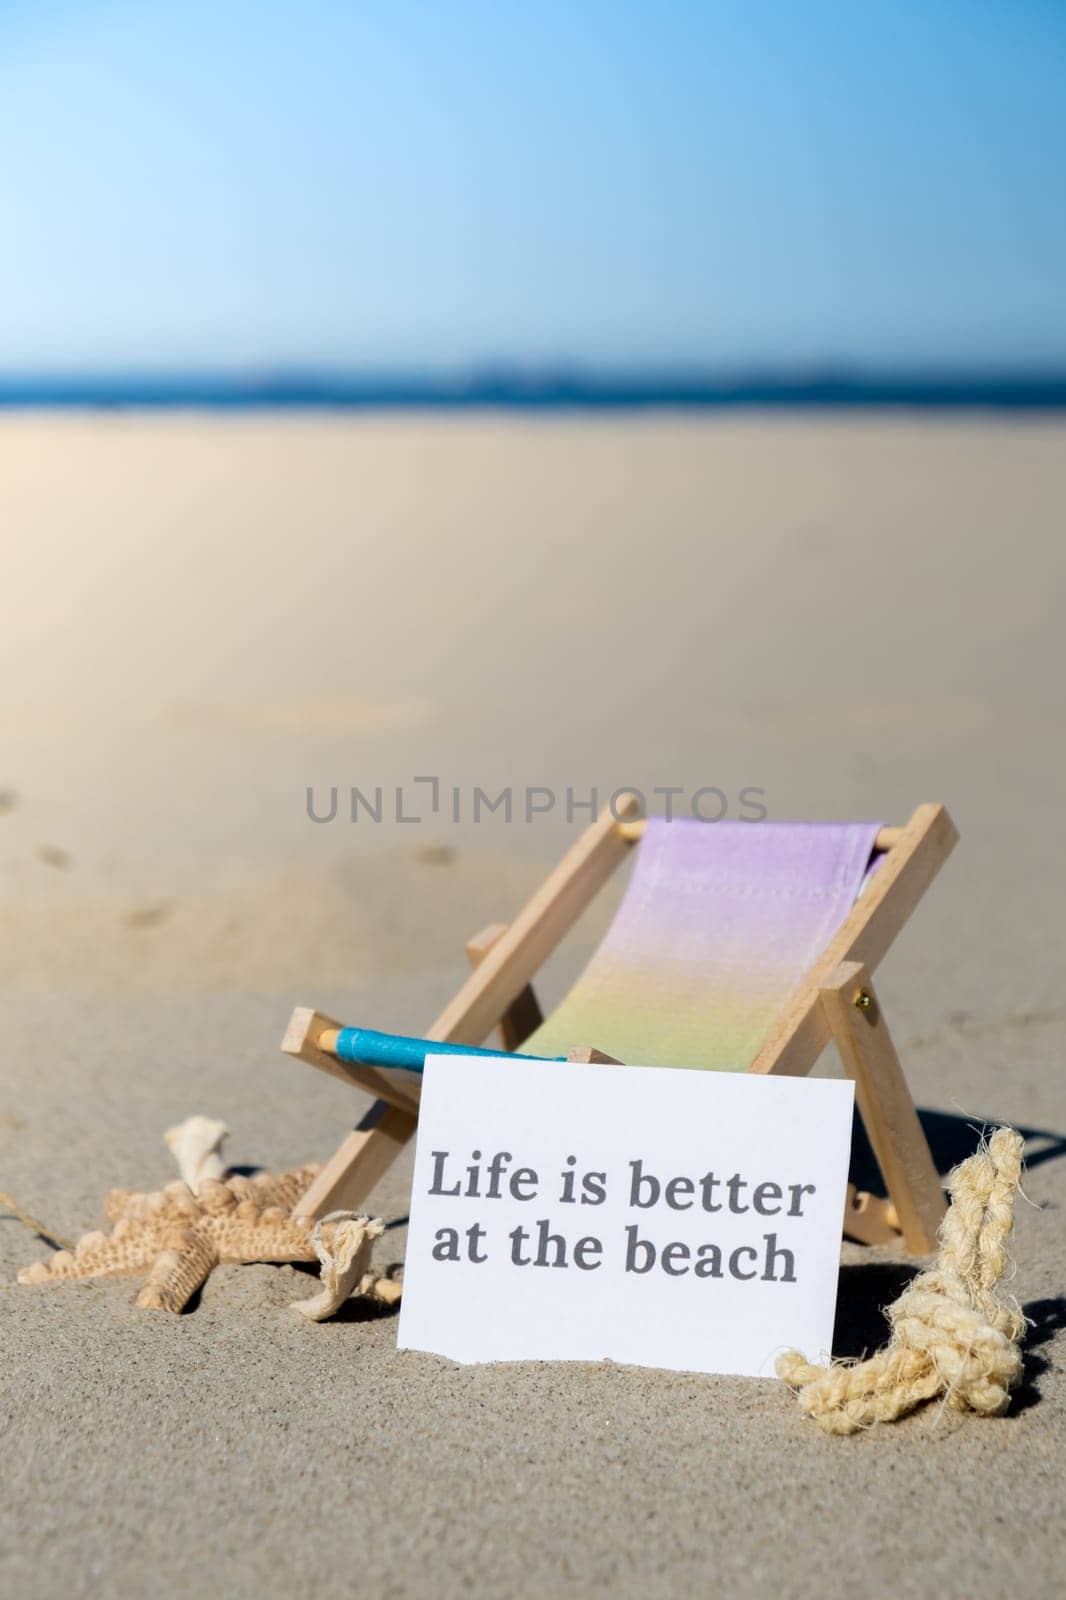 LIFE IS BETTER AT THE BEACH text on paper greeting card on background of beach chair lounge starfish summer vacation decor. Sandy beach sun. Holiday concept postcard. Travel Business concept